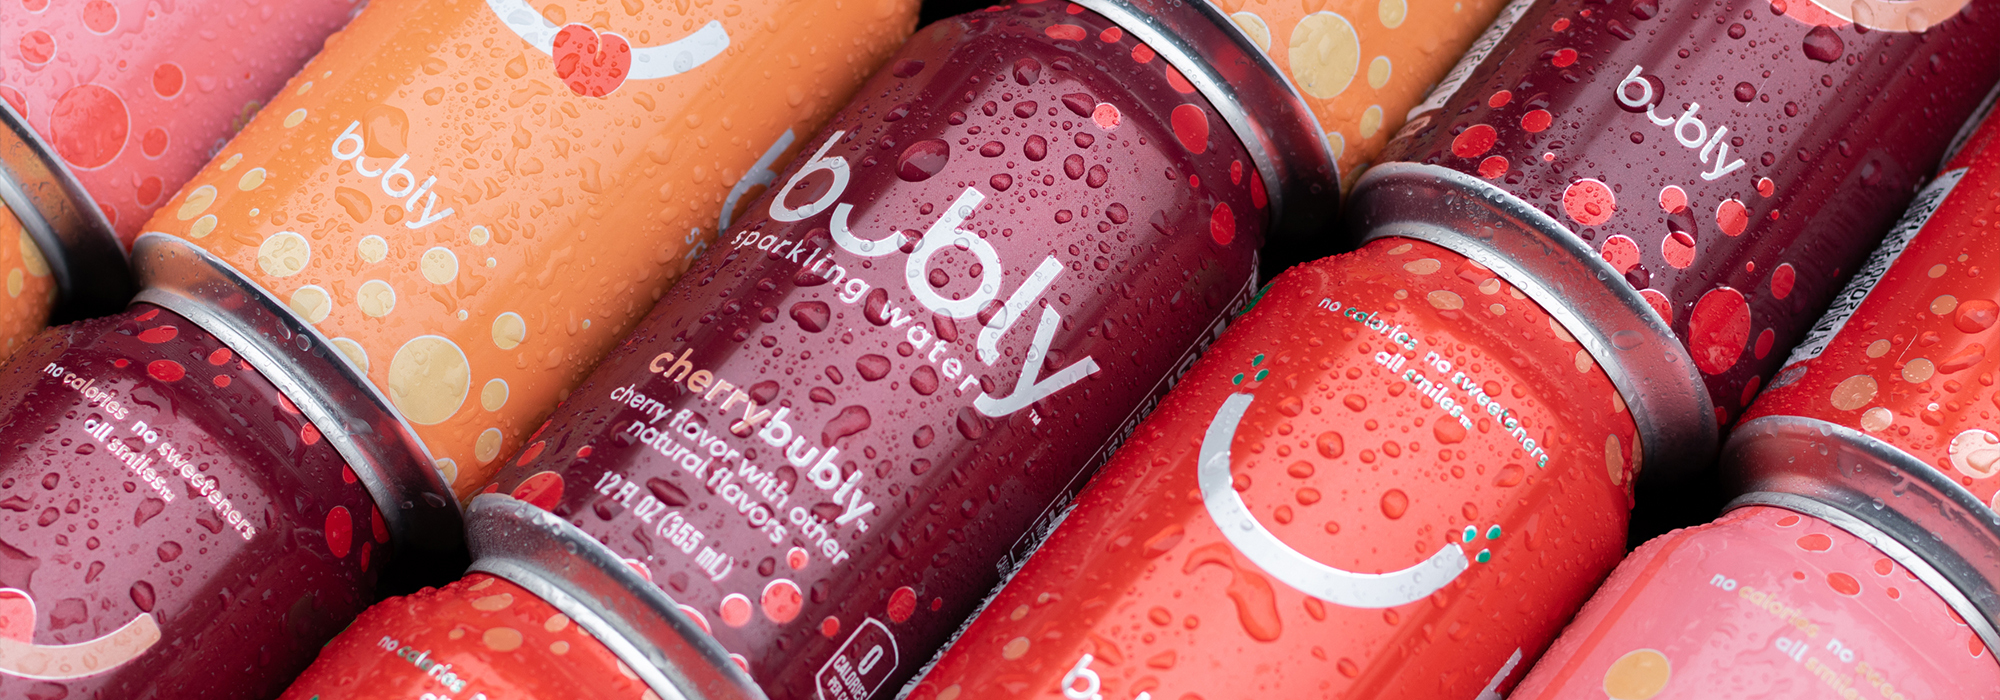 Colorful Bubly sparkling water cans laying in a diagonal pattern